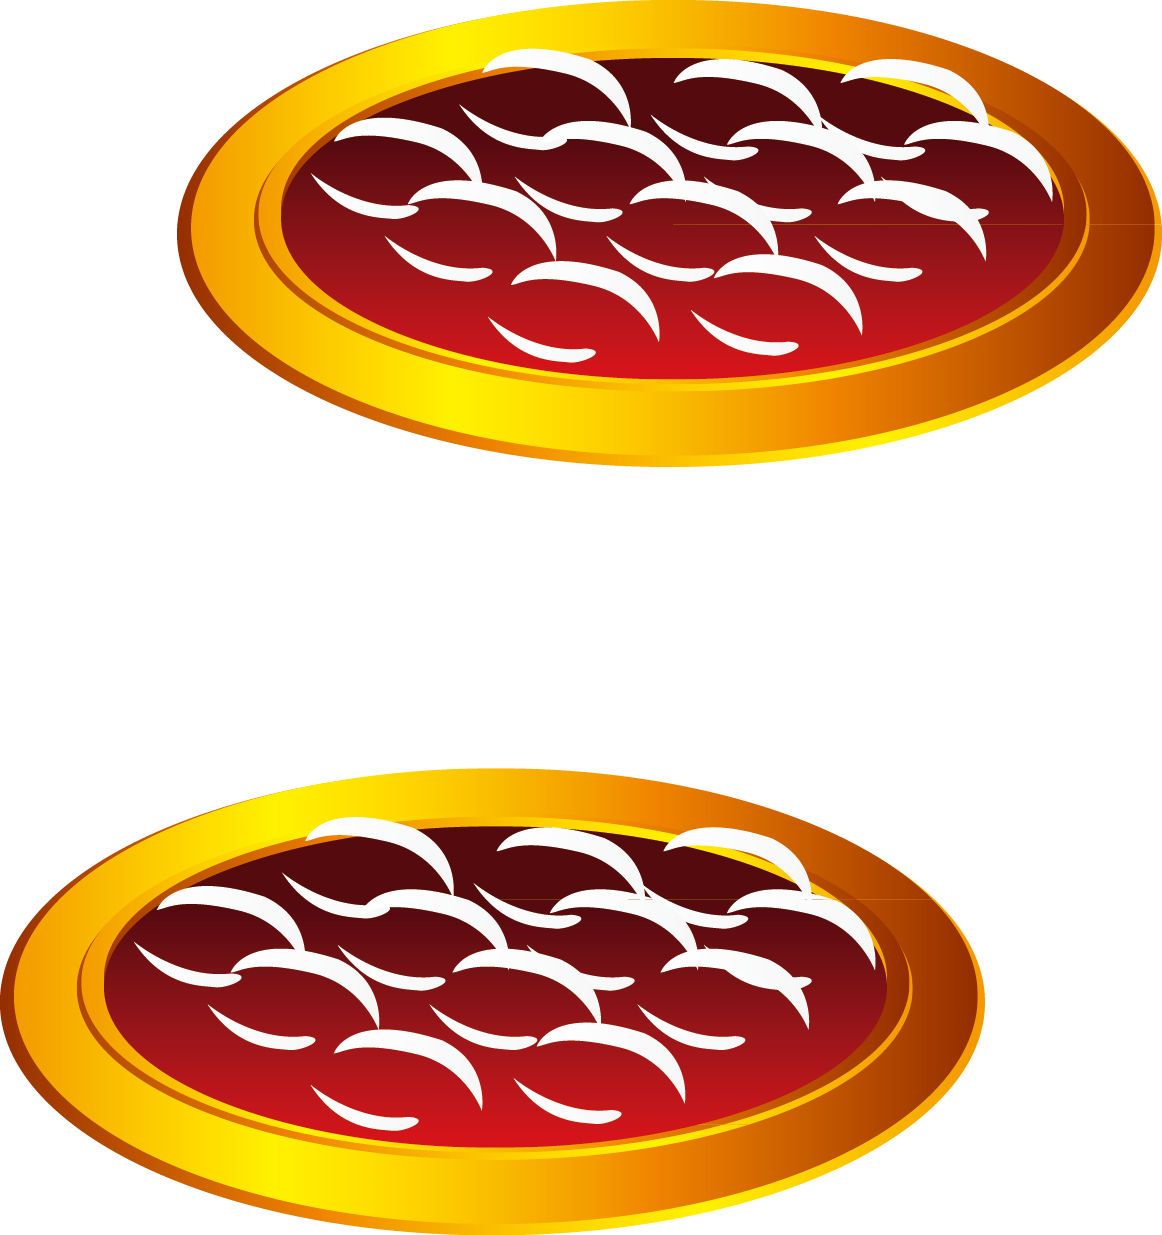 A Red And Gold Pizza